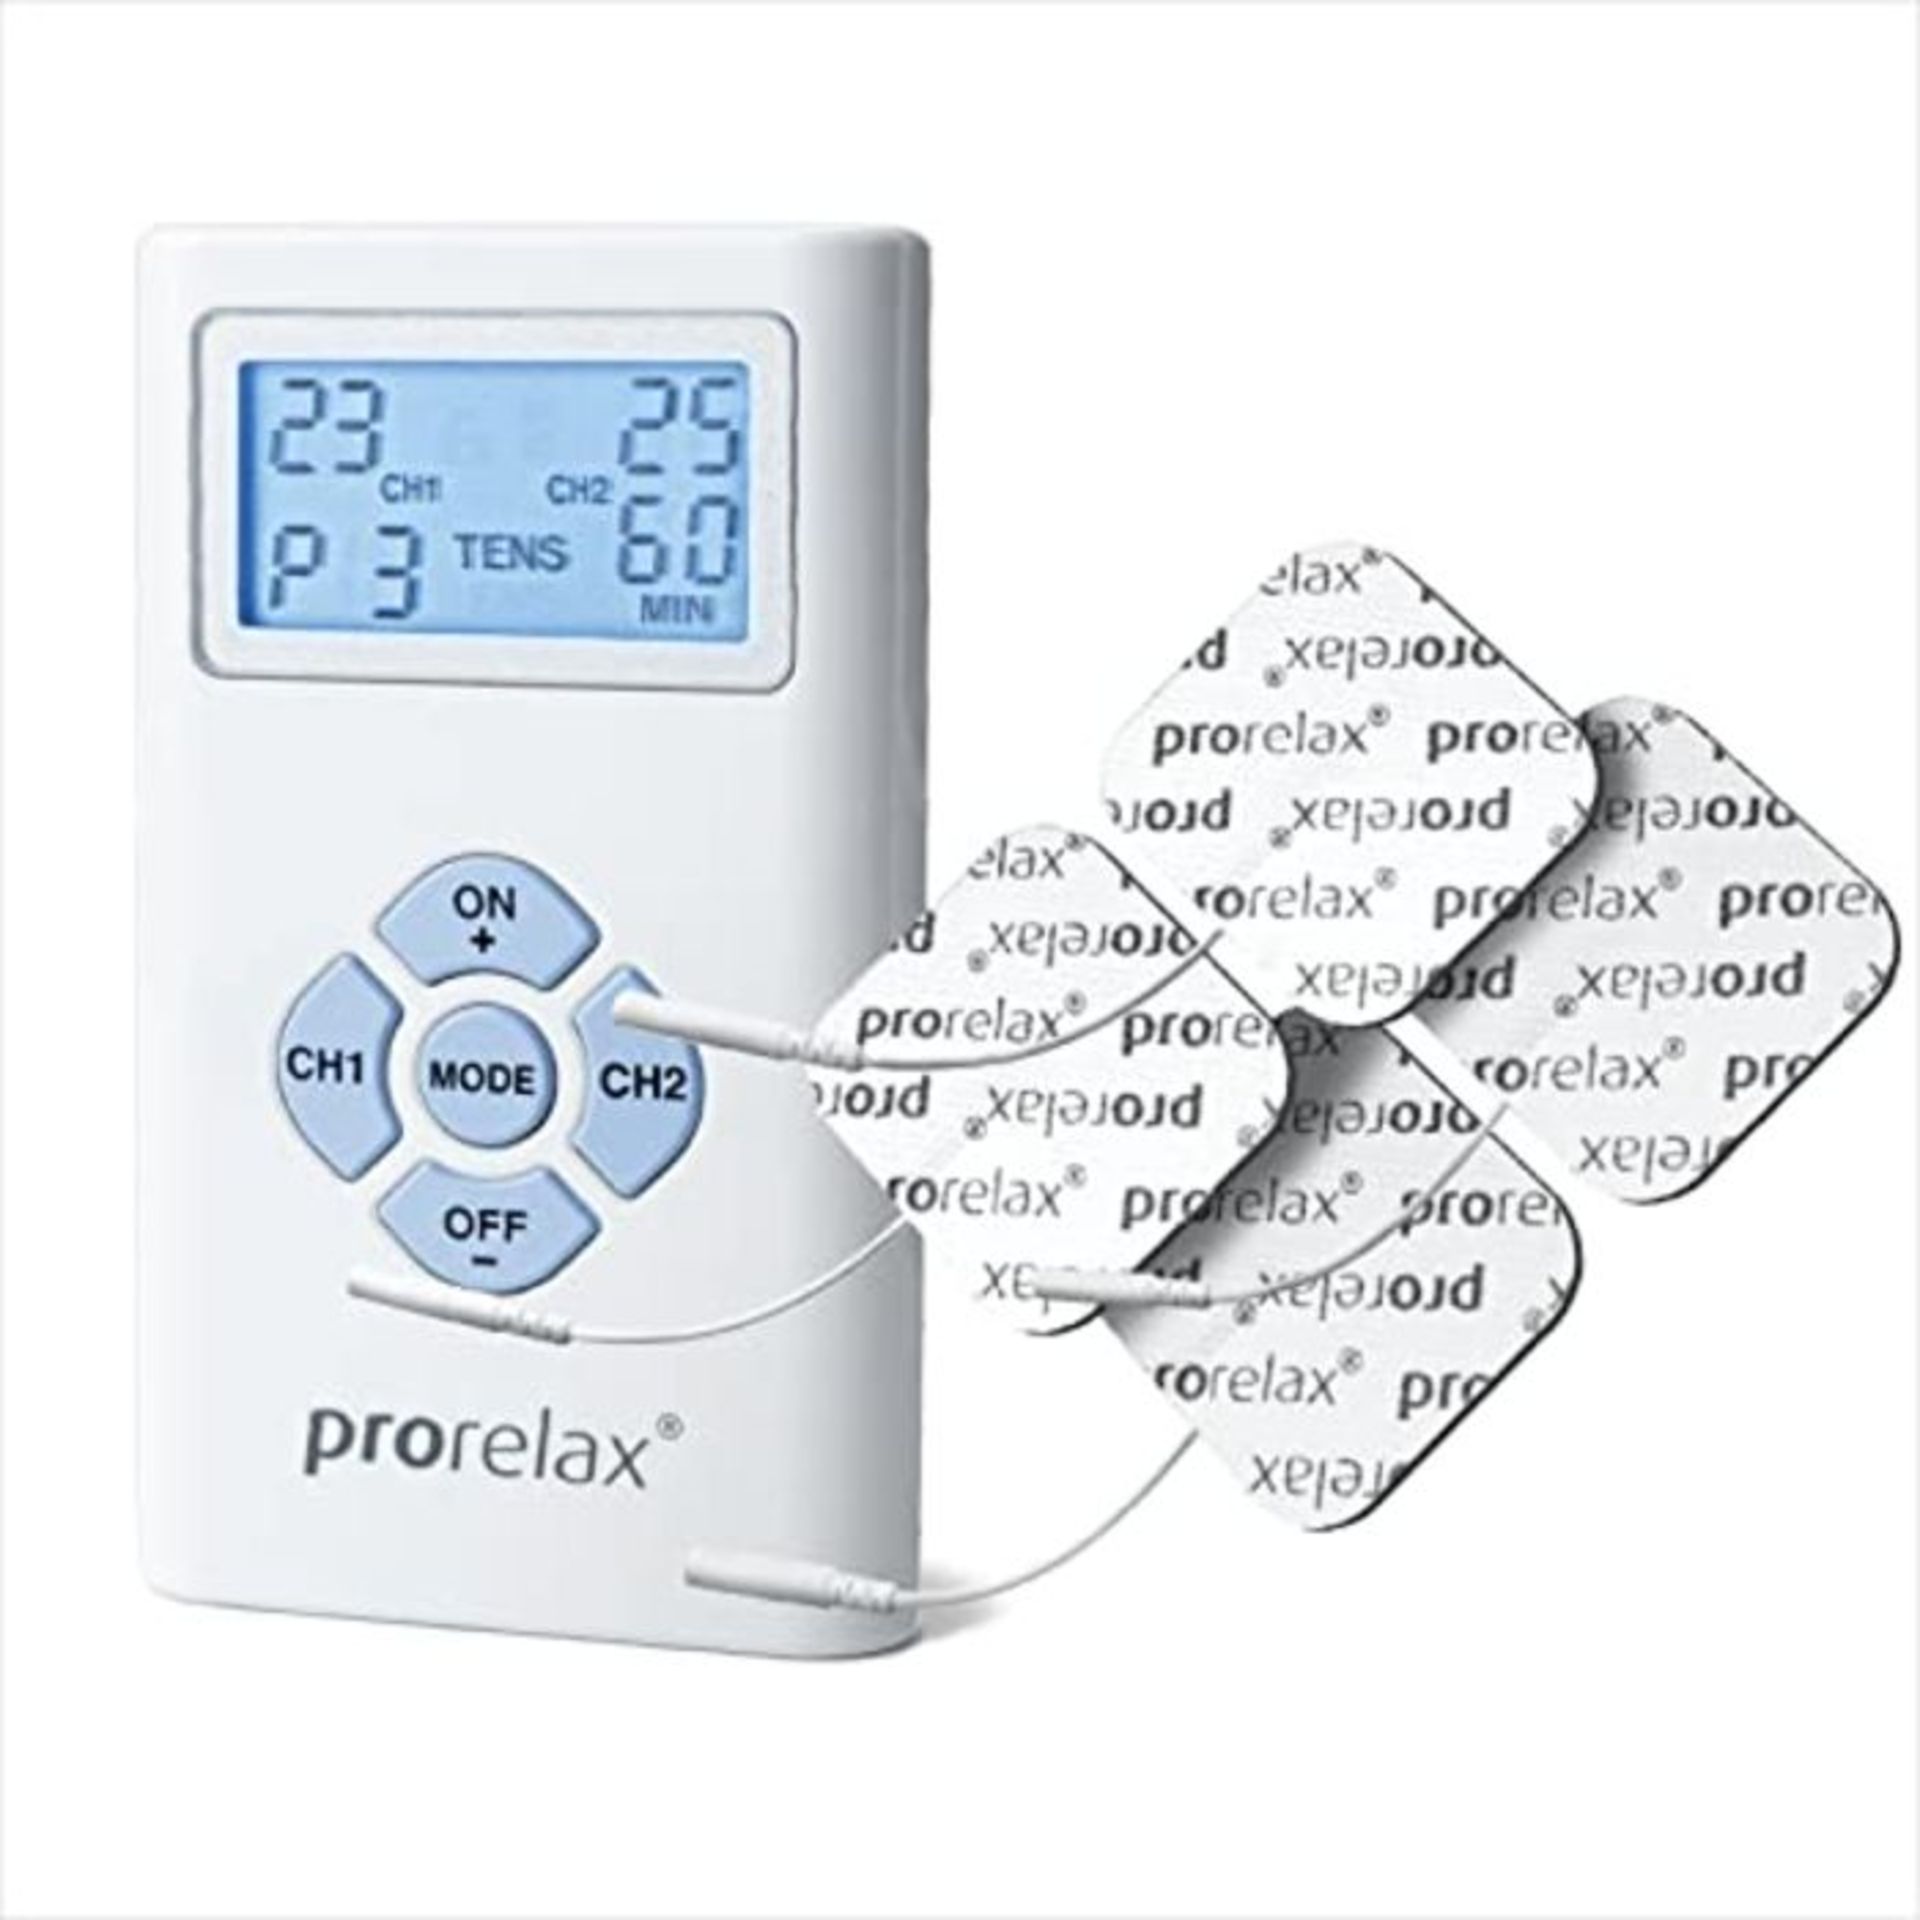 prorelax TENS/EMS Duo | Electrostimulation device | 2 therapies with one device | Natu